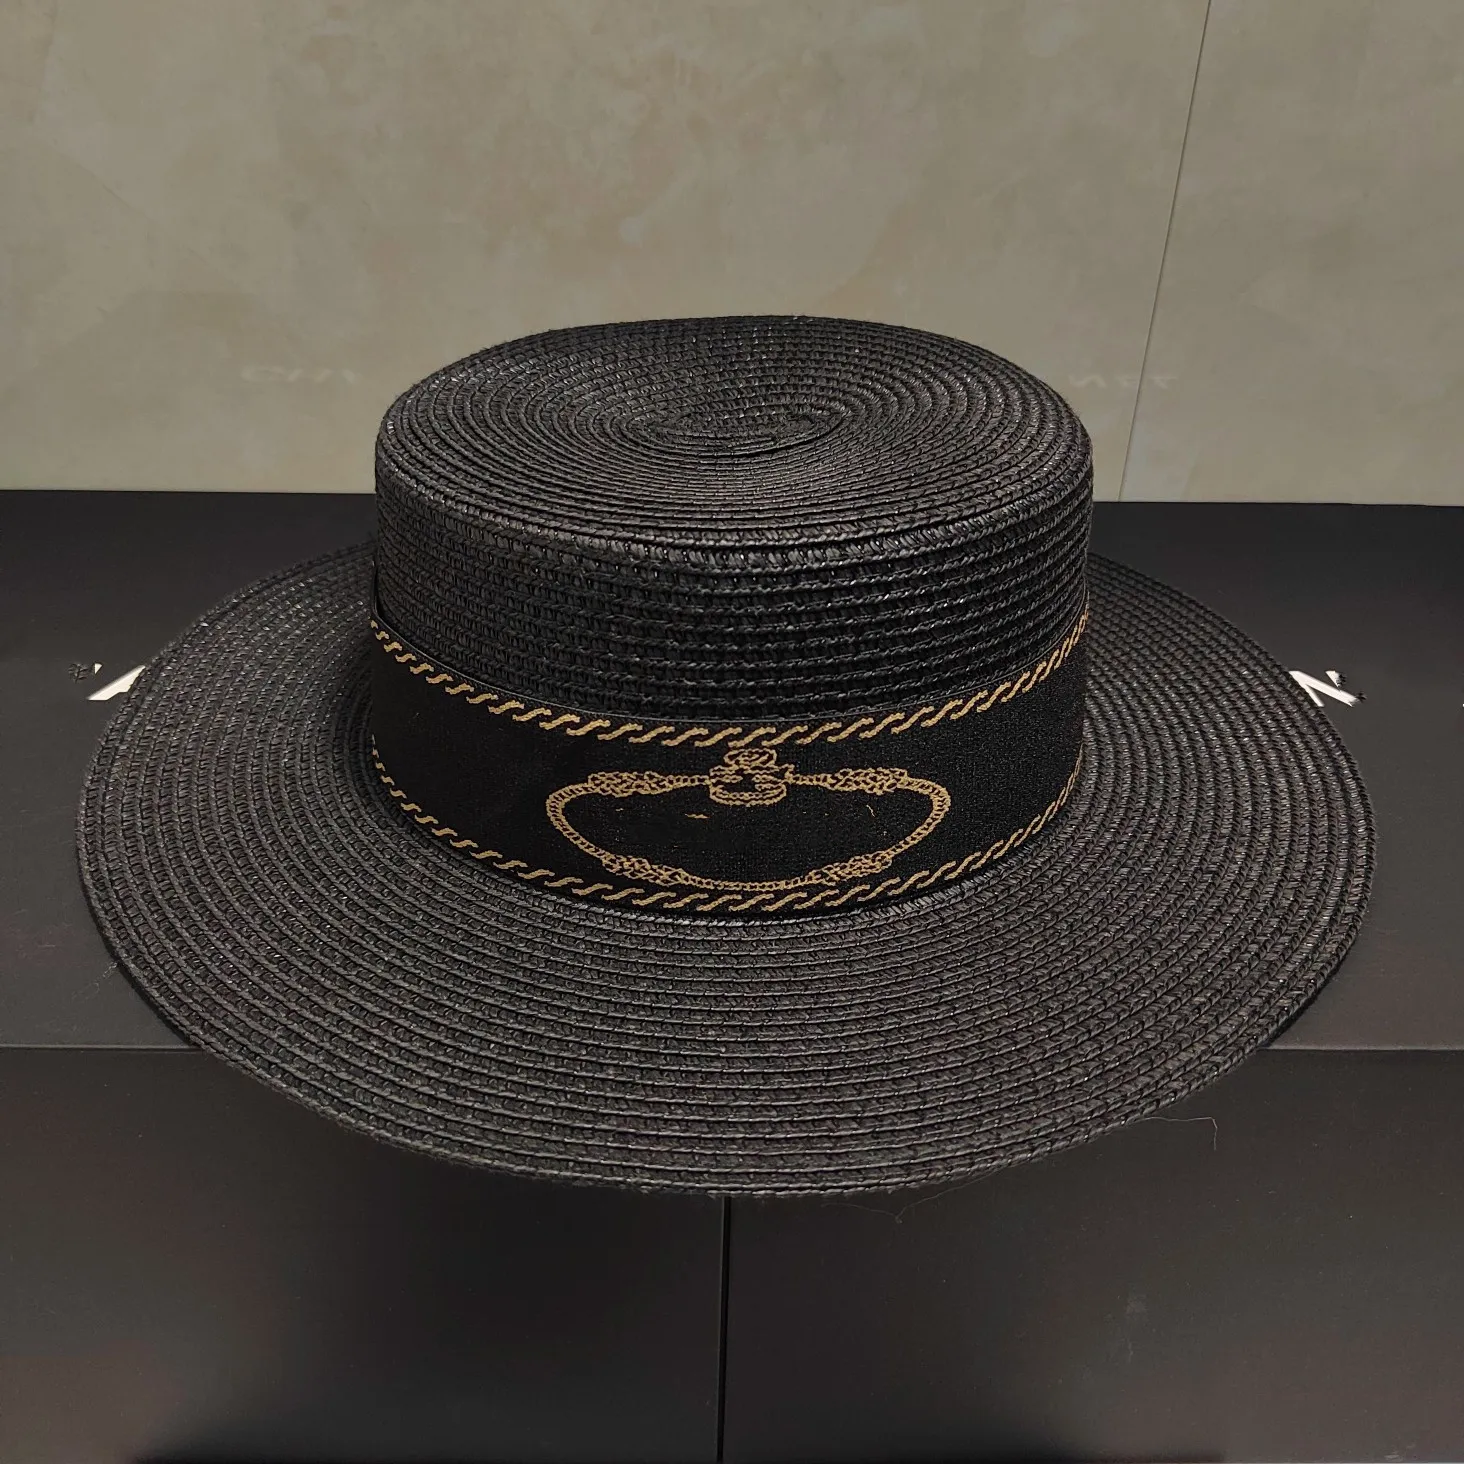 Designer Real Straw Hat With Wide Brim For Men And Women Letter Print,  Grass Braid Caps In Multiple Styles From Luxuryglass_rb, $17.09